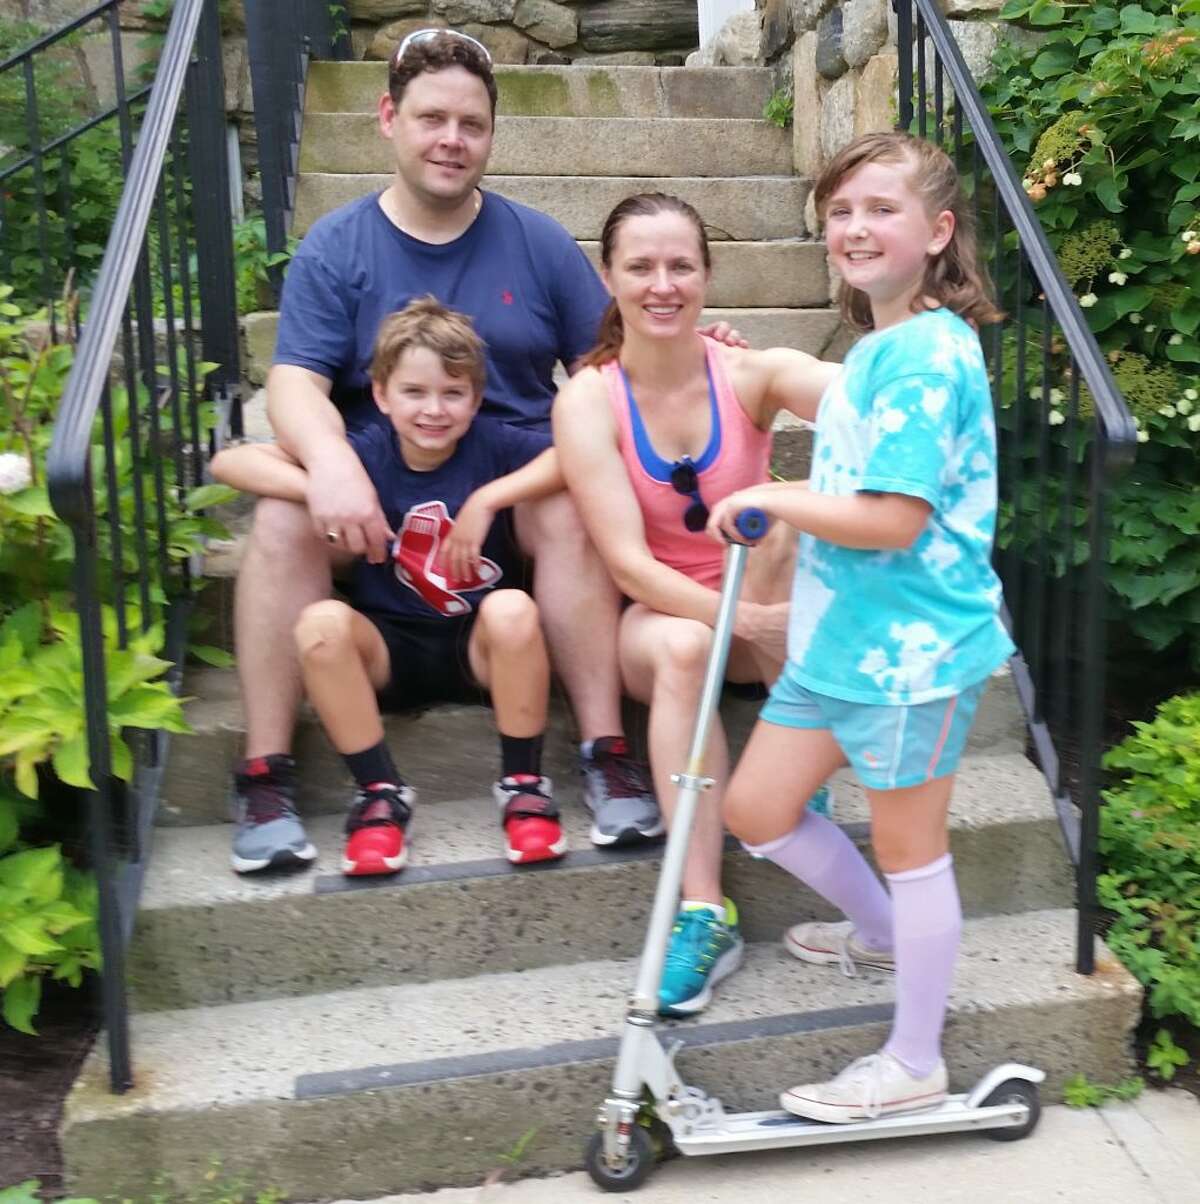 Leaders of Nutmeg Festival 2018, Nick and Claire Simard, with their son, Gabriel, and daughter, Amelie, who tested some of the toys for sale, including a Razor scooter.